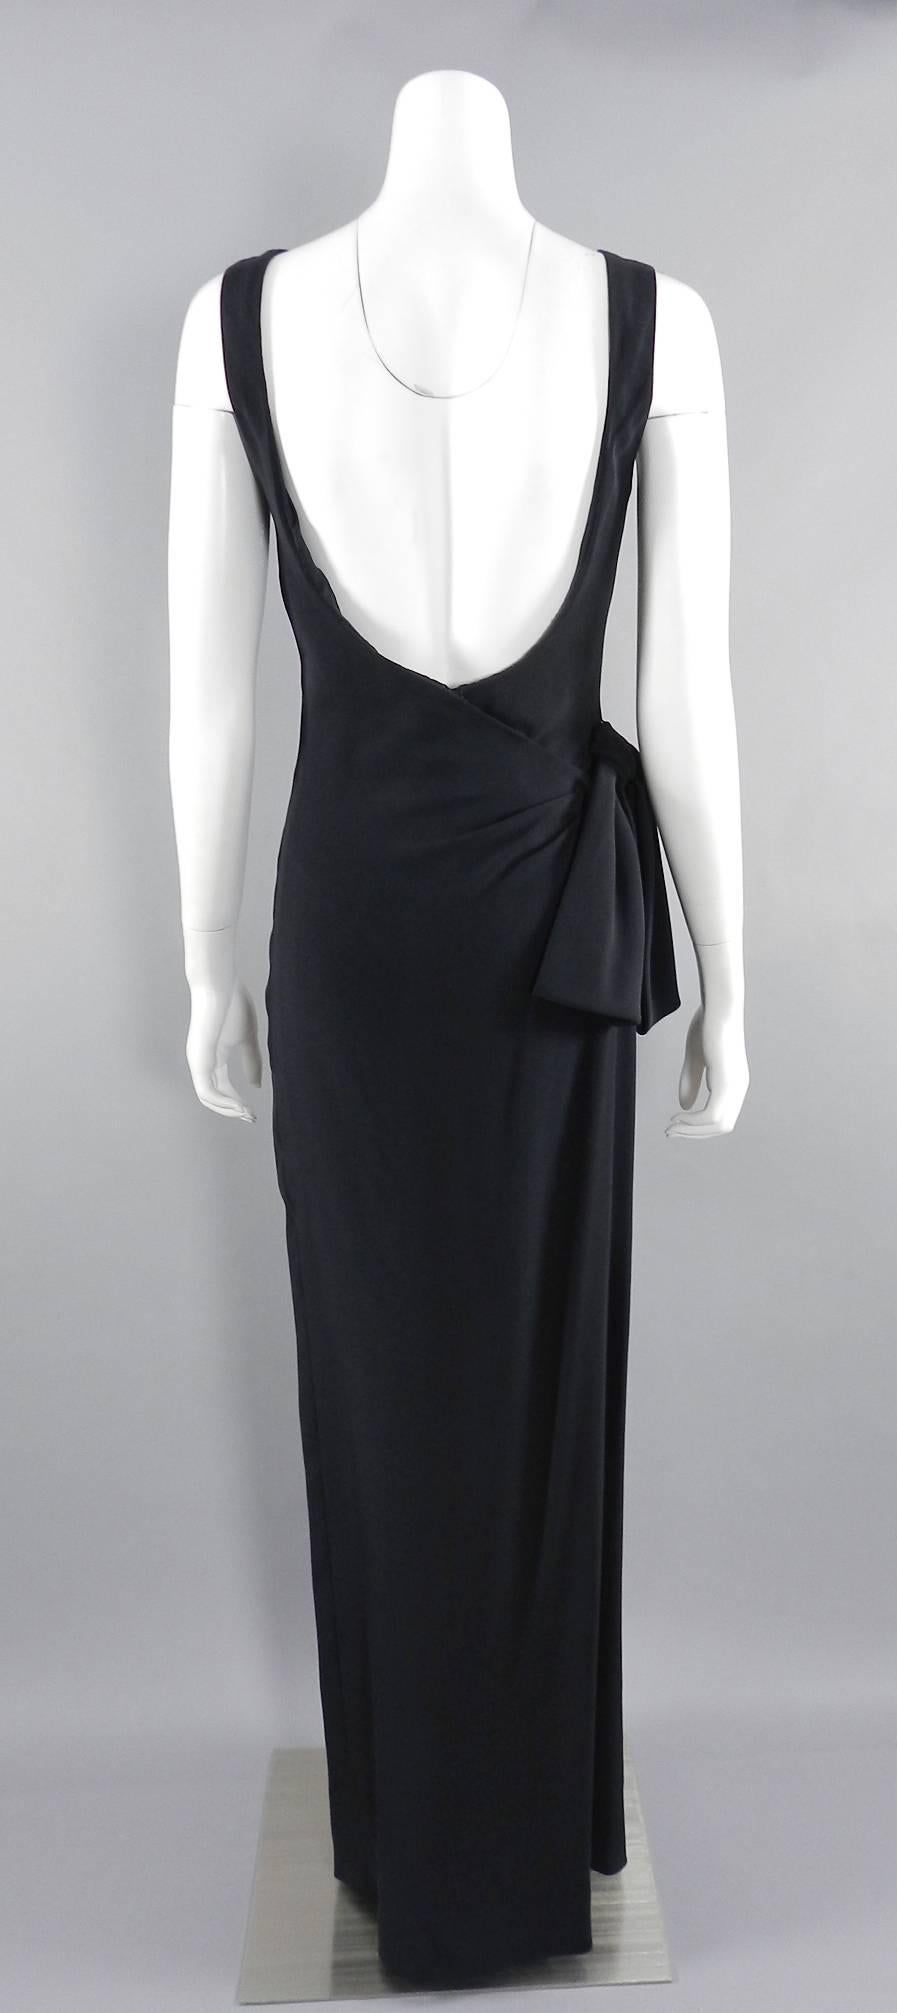 Yves Saint Laurent AW 1998 Haute Couture Black Low Back Evening Gown For Sale 2